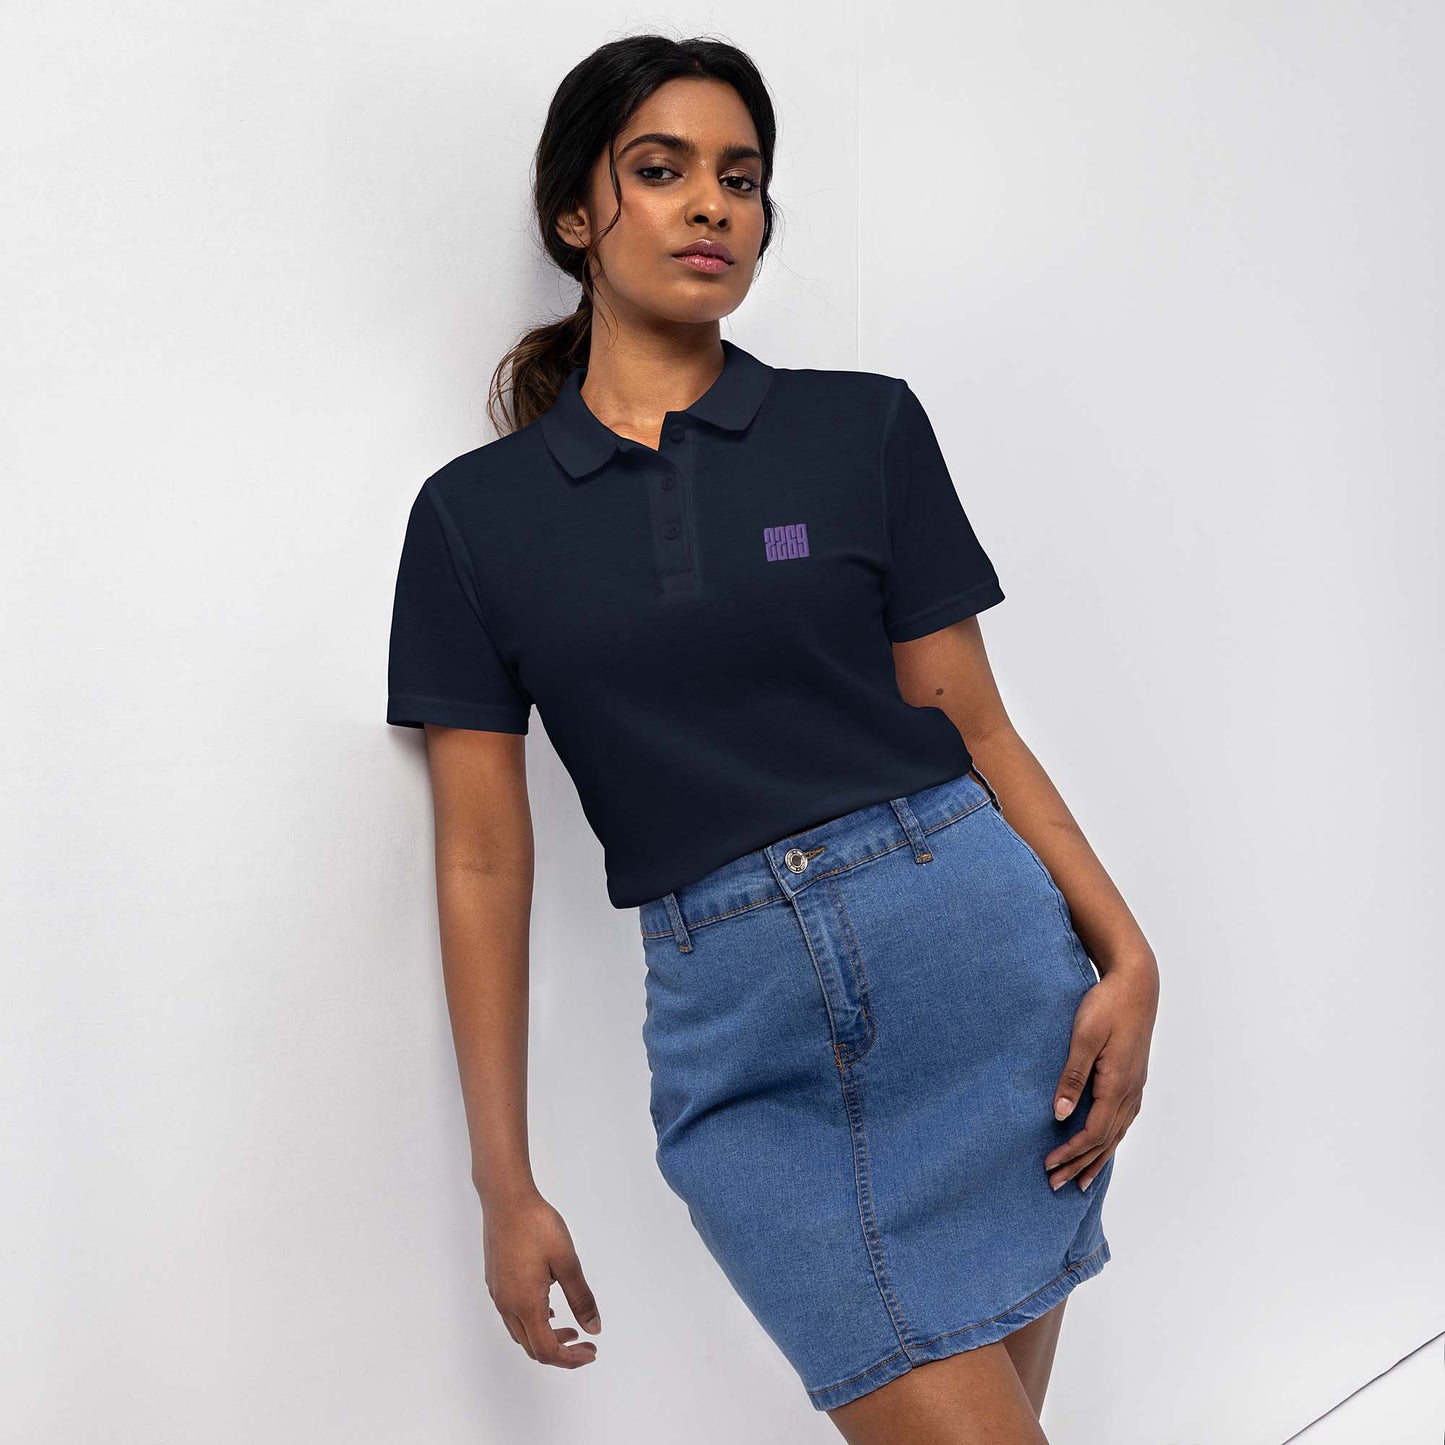 Women’s navy pique polo shirt with embroidered 2269 logo